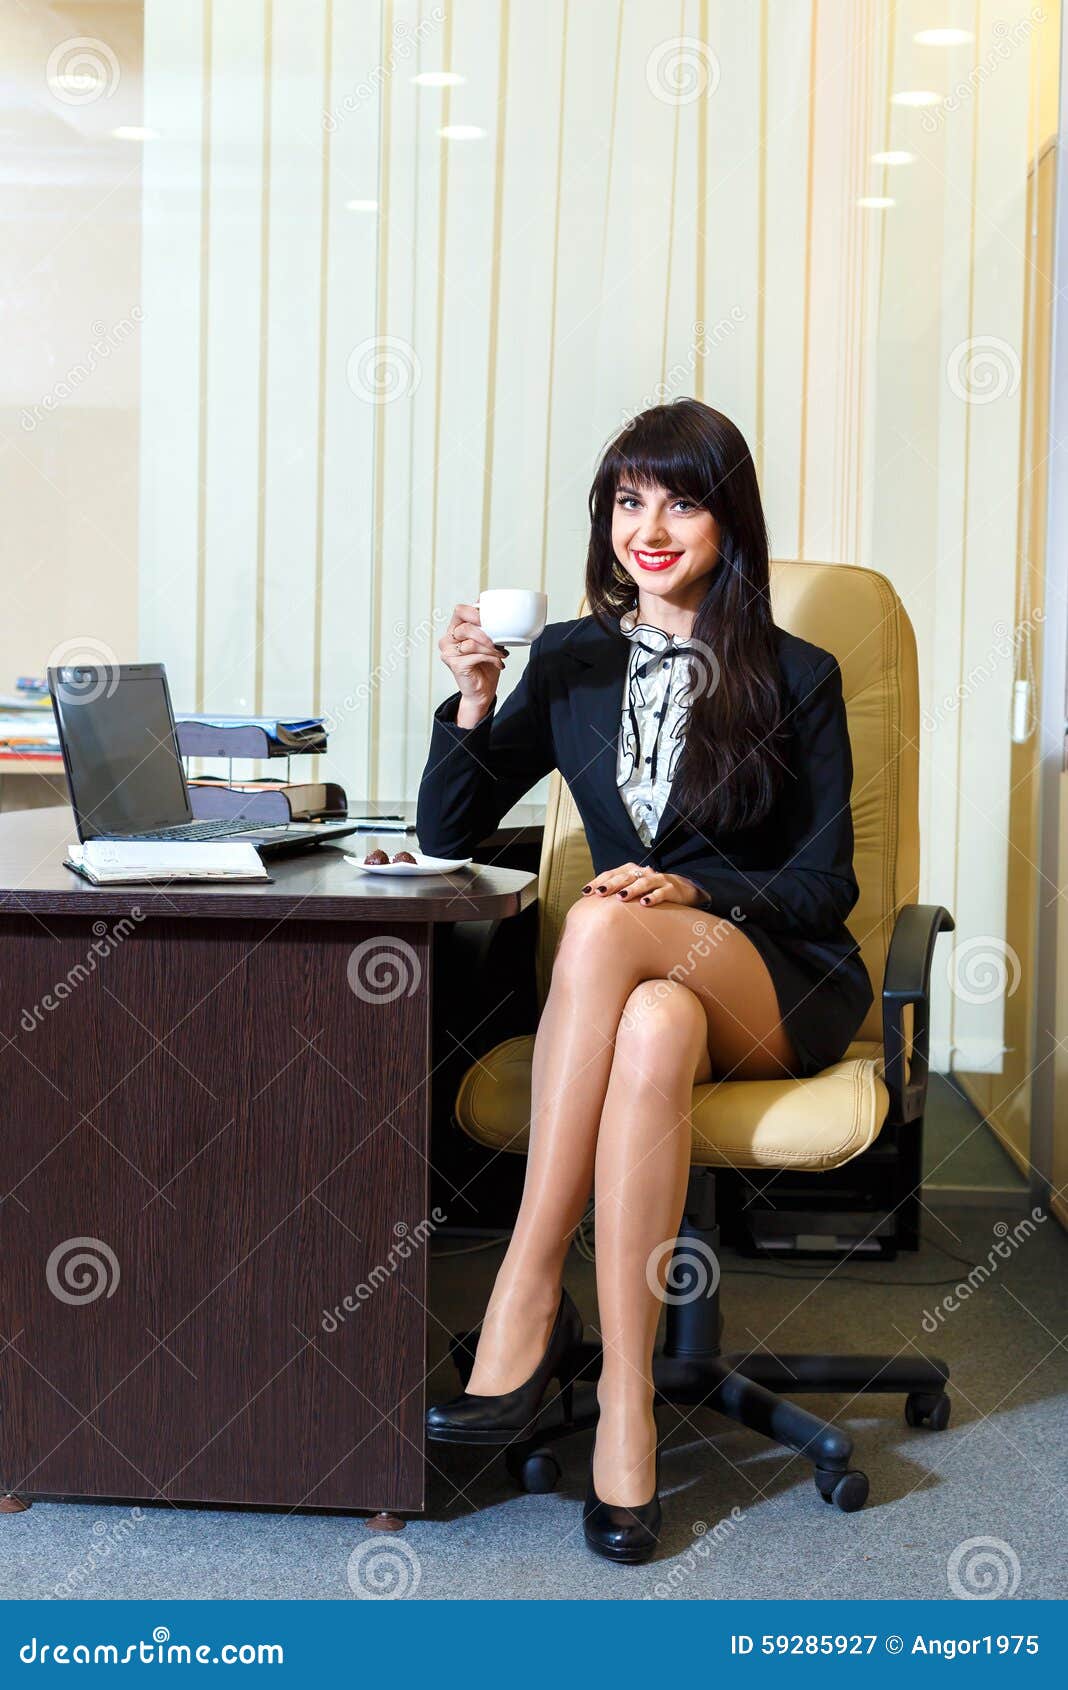 Attractive Woman In A Short Skirt Drinking Coffee Stock